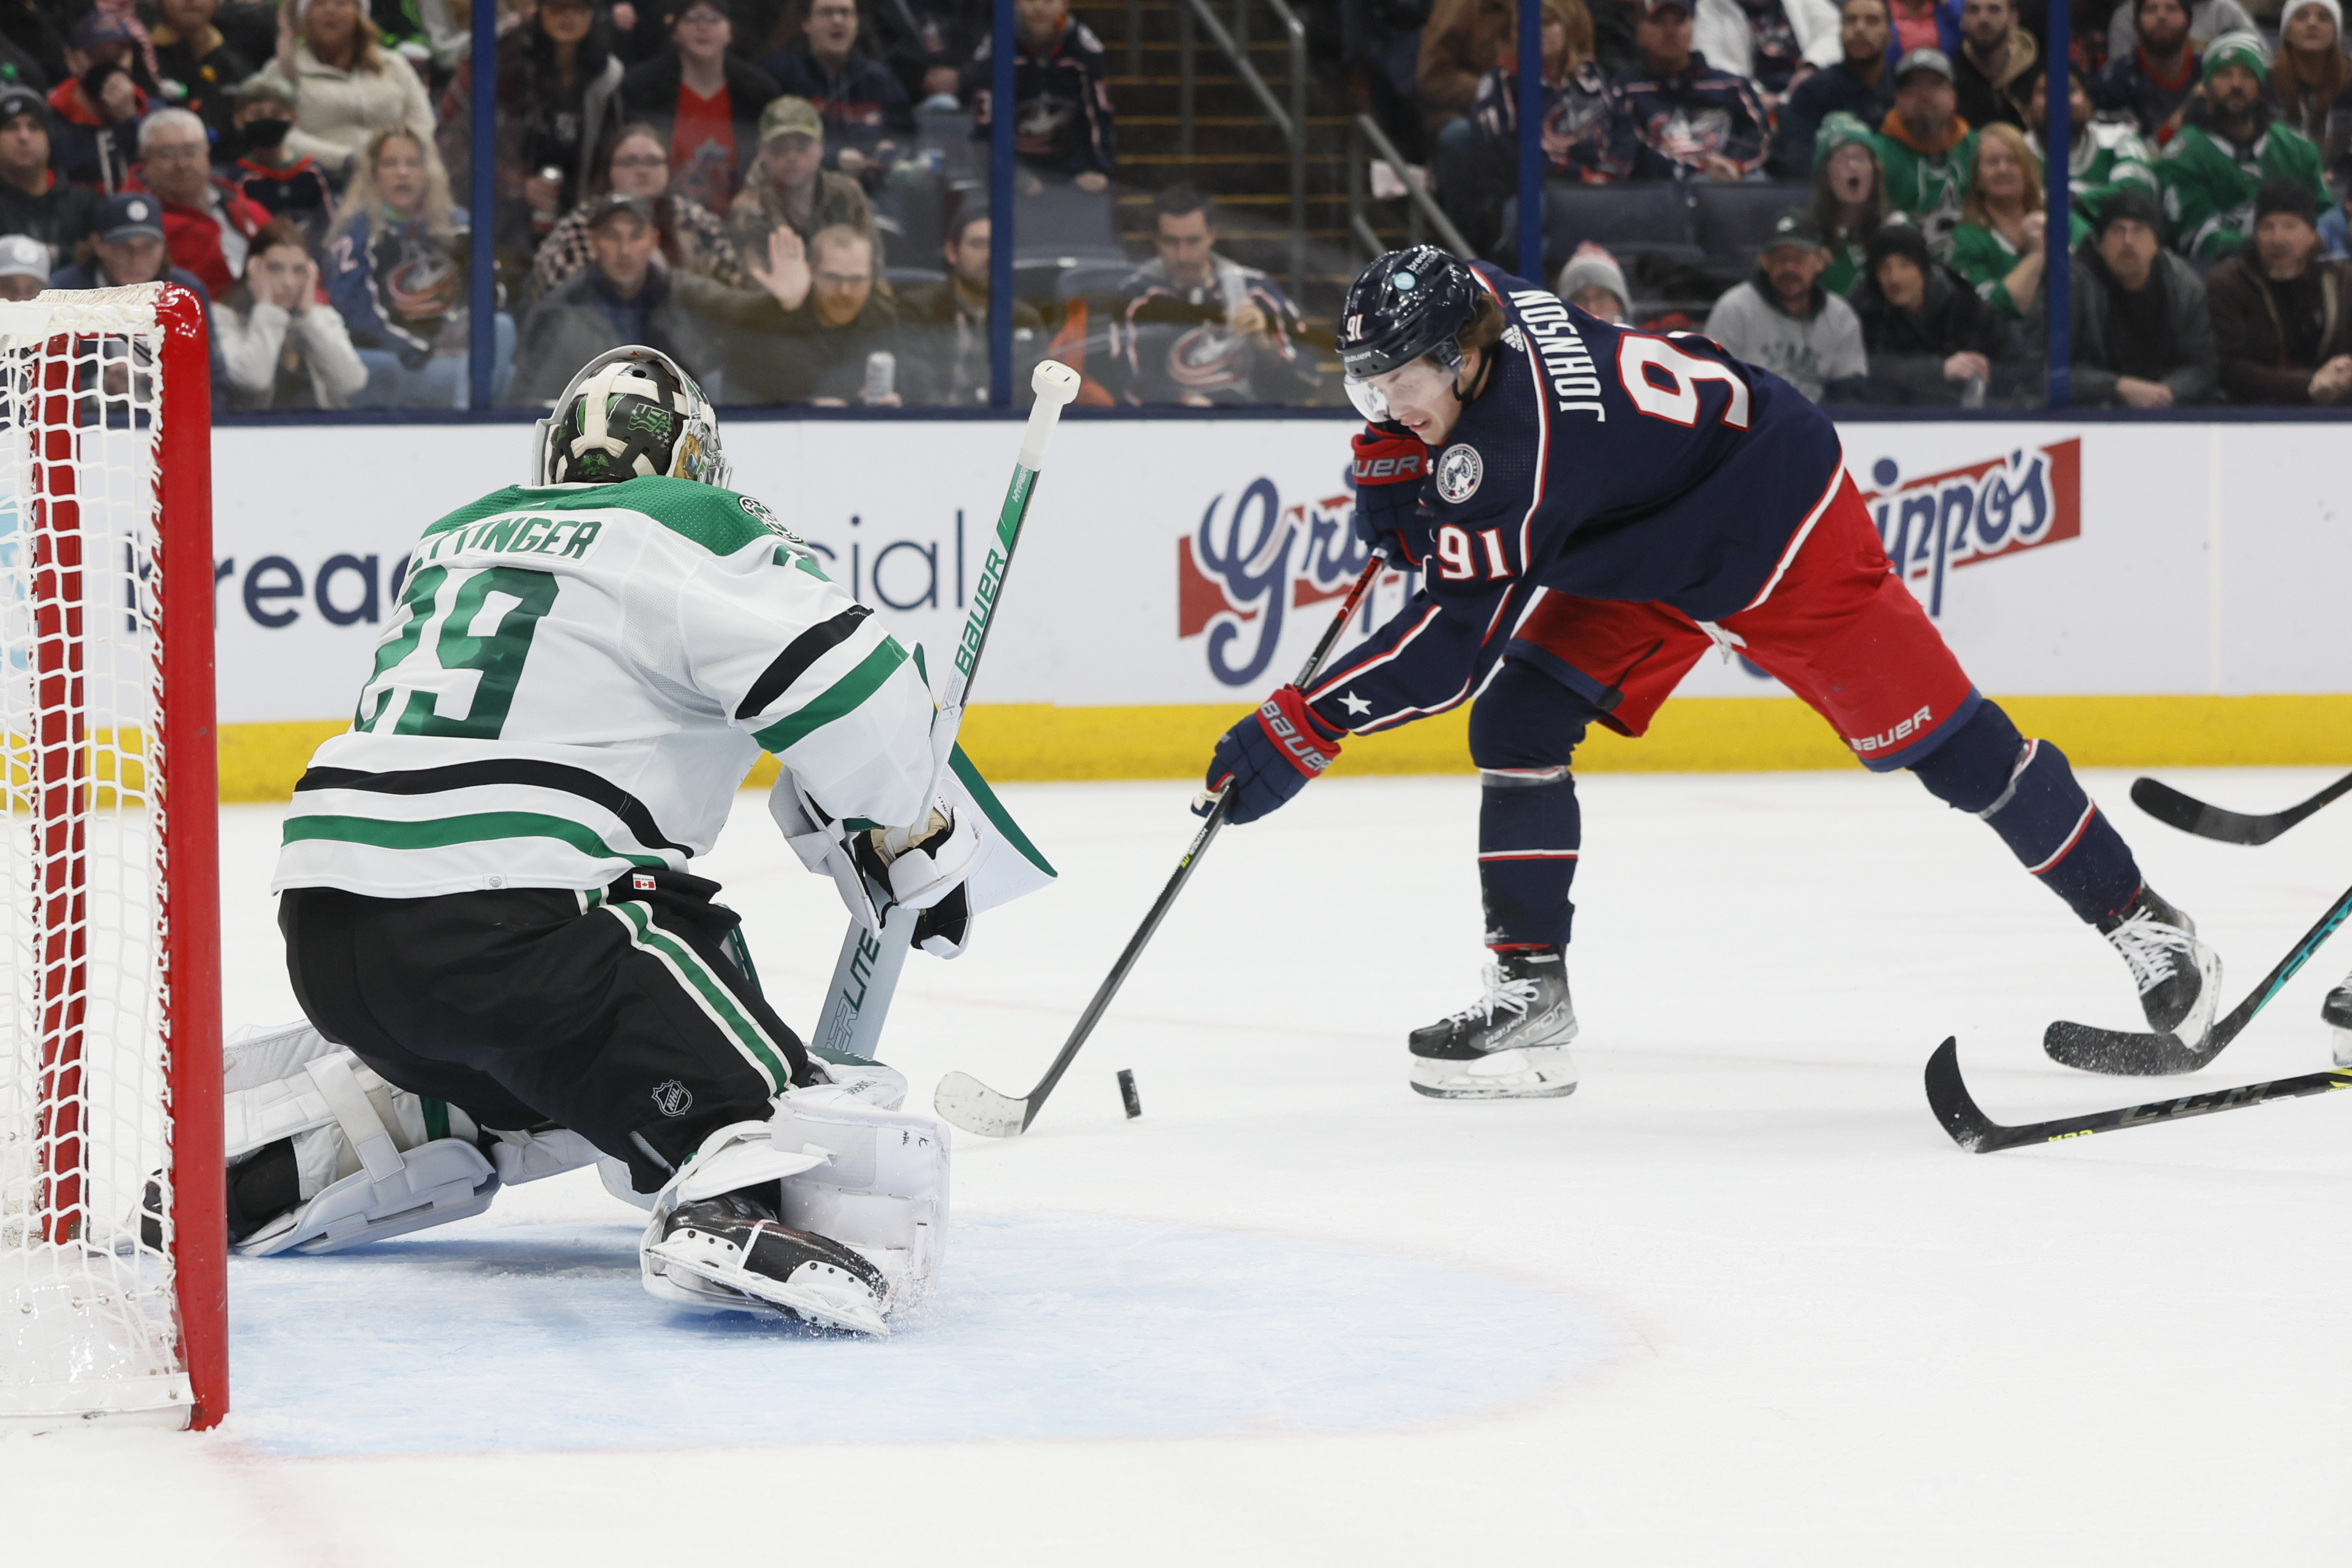 Dallas Stars conclude their roadtrip visiting New Jersey to play